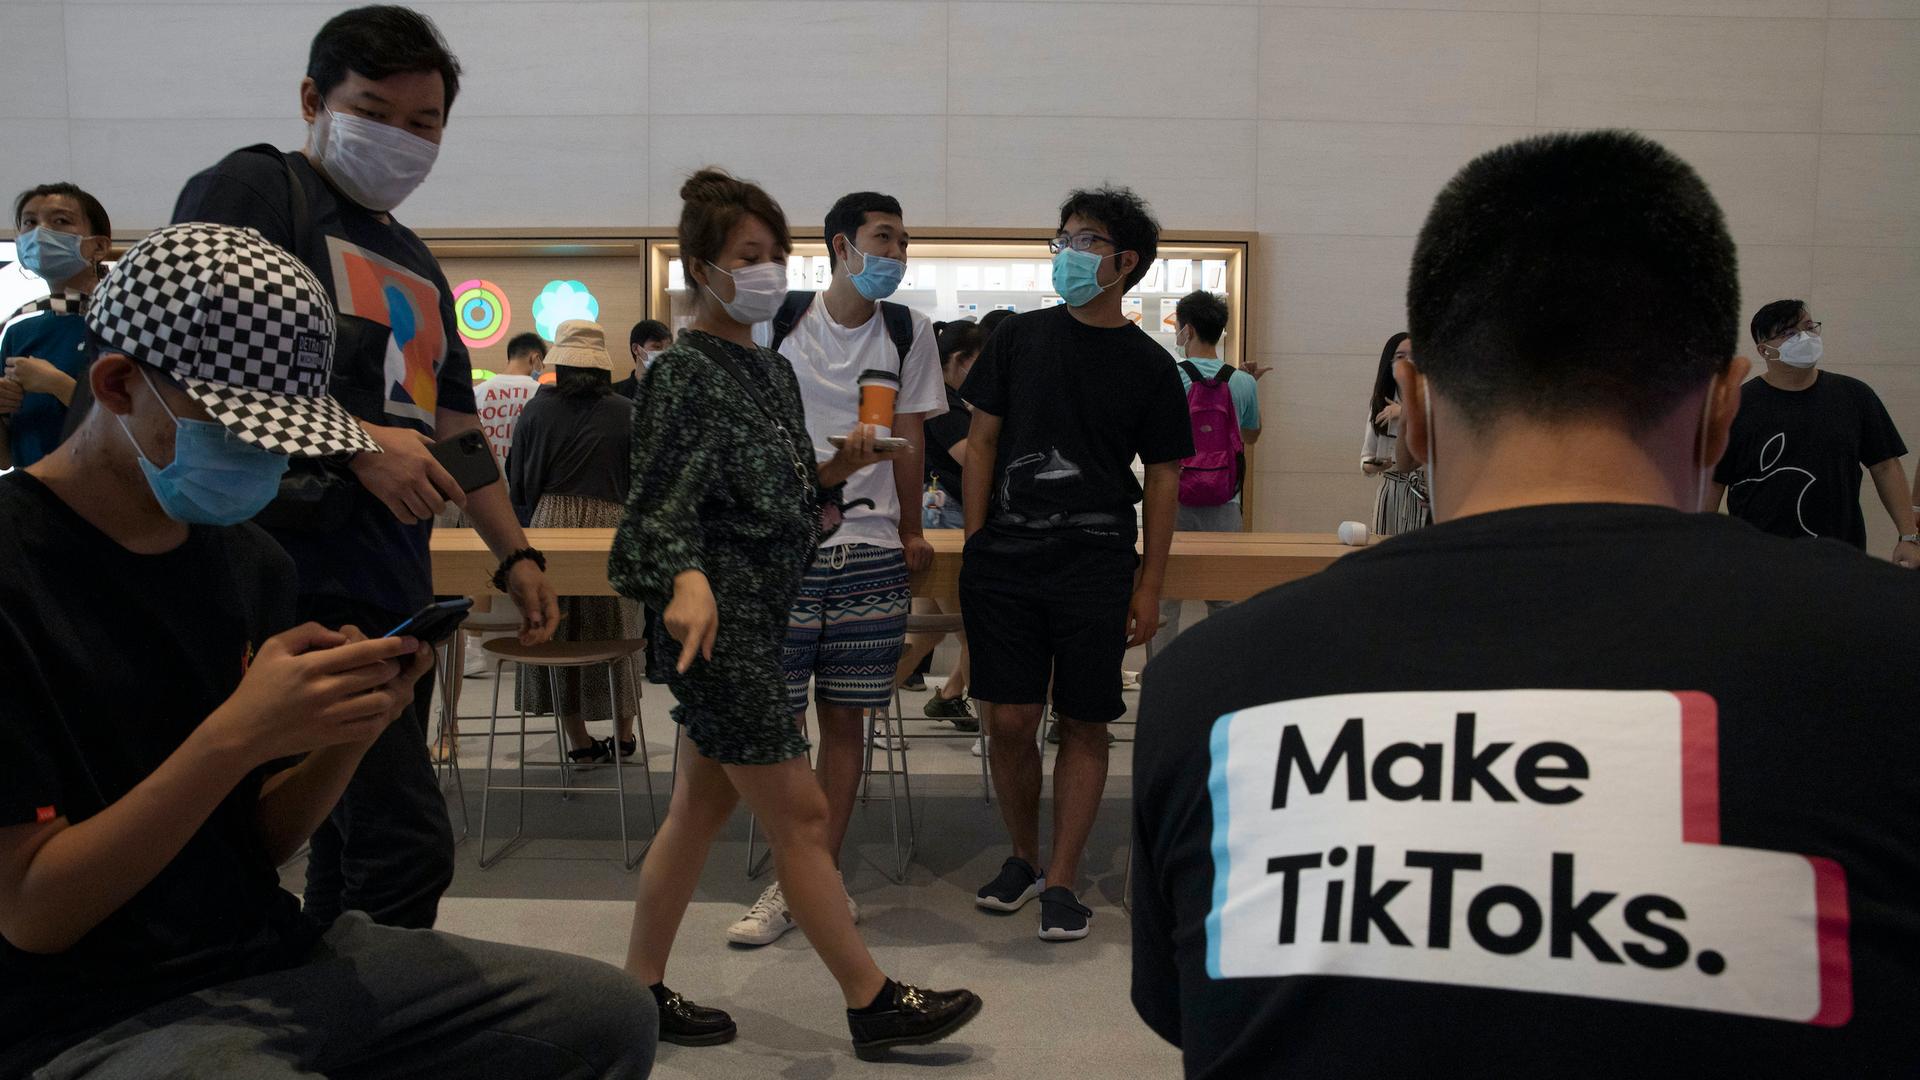 Several people are shown in an Apple store in Beijing with one person in the near ground wearing a t-shirt with "Make TikToks" printed on it.